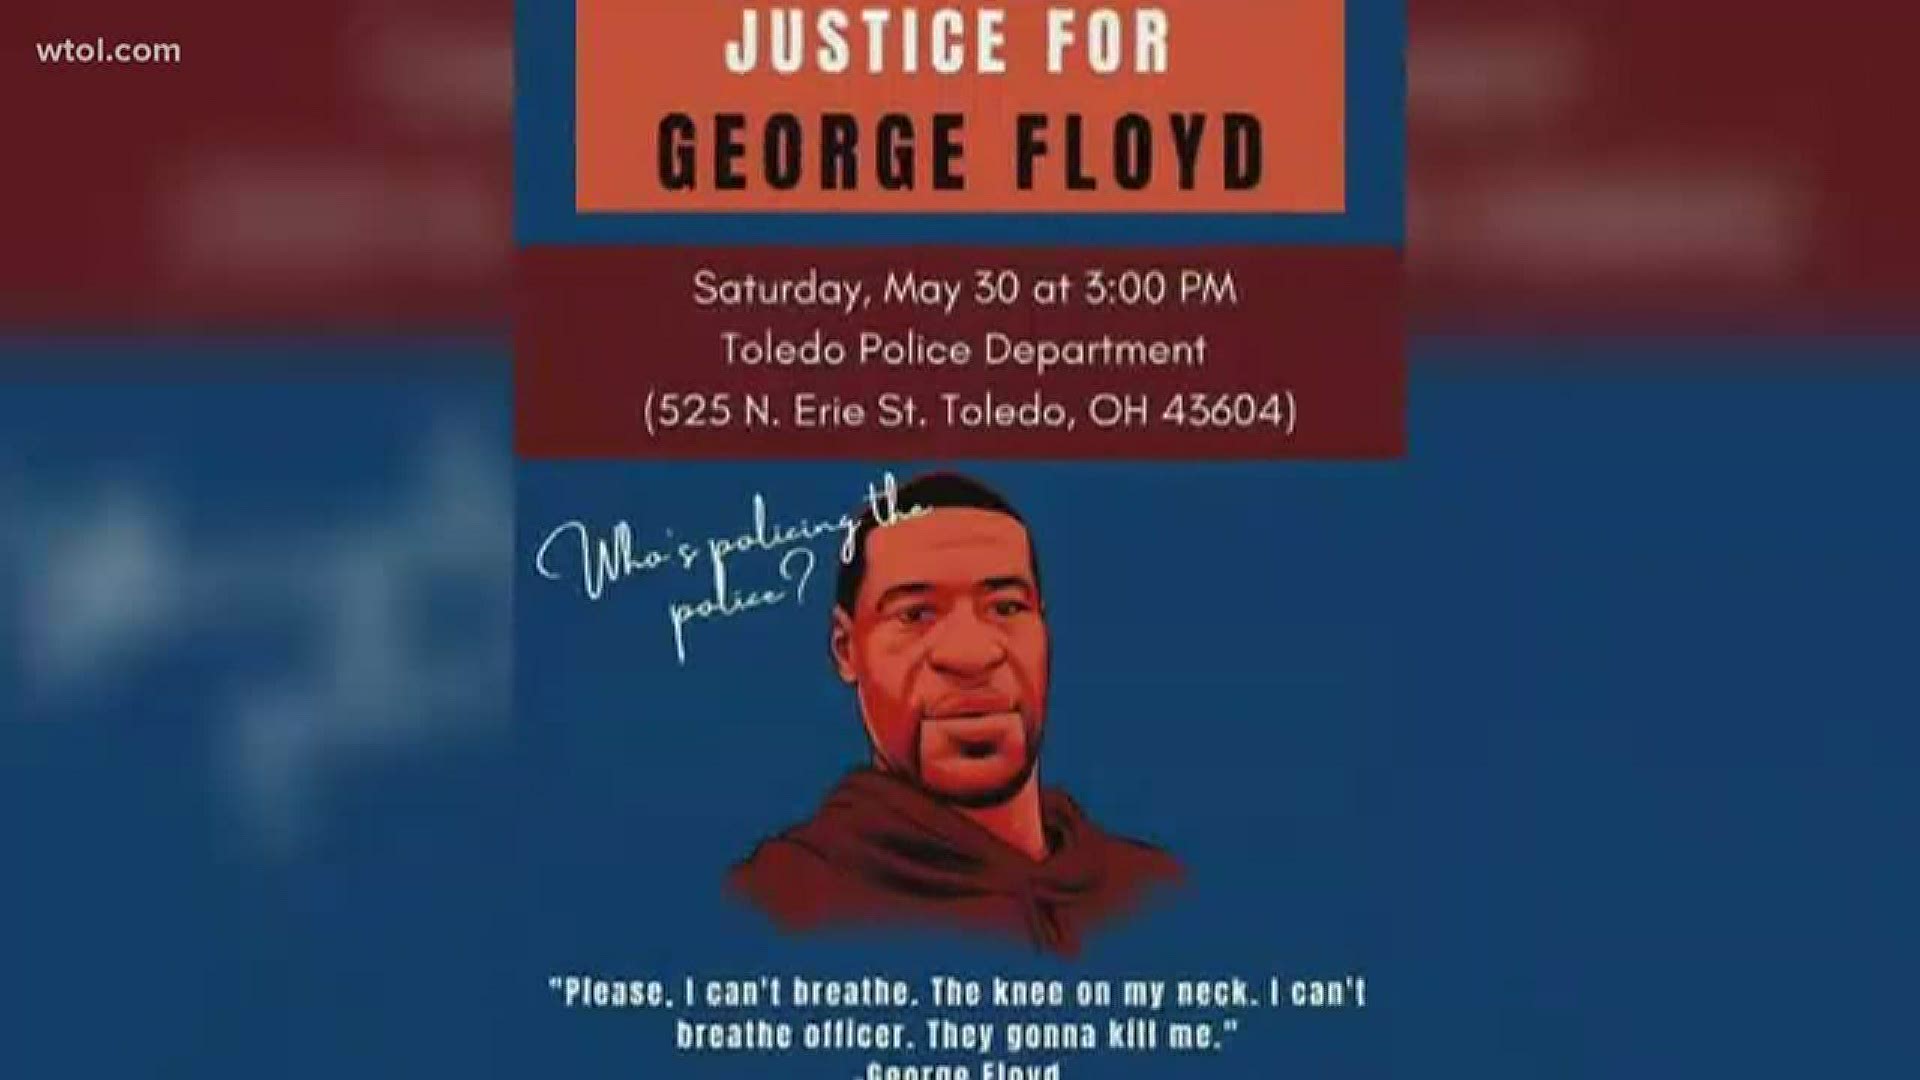 Activists are aiming to demand justice for the life of George Floyd.